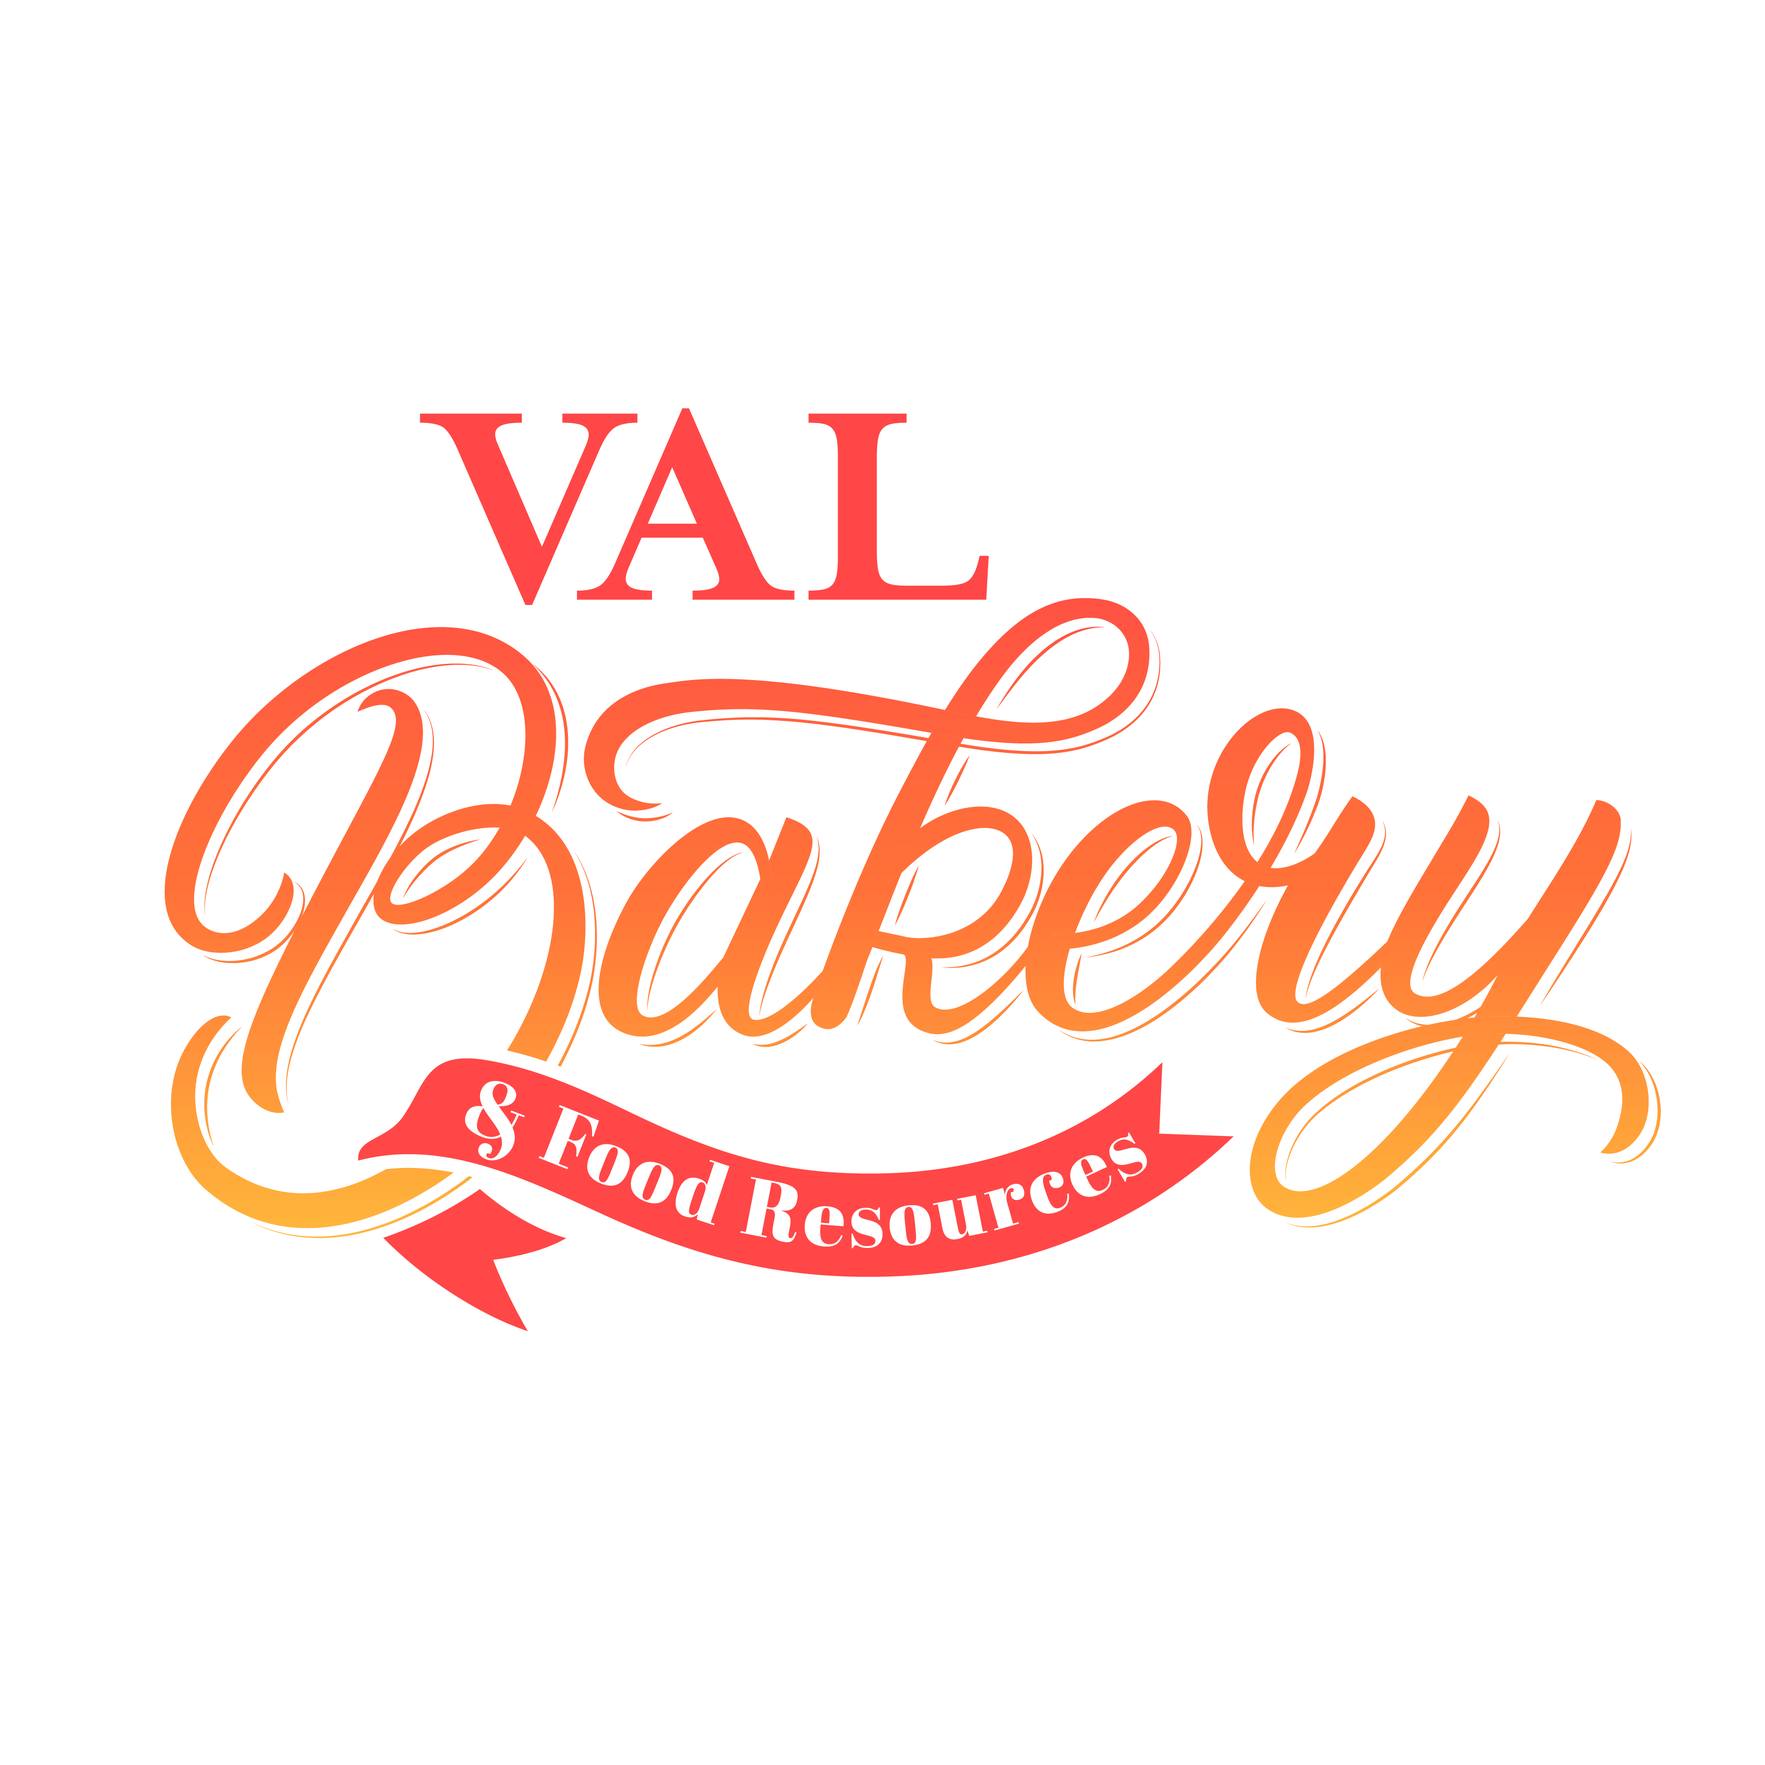 Val Academy and Val Bakery Studio Logo